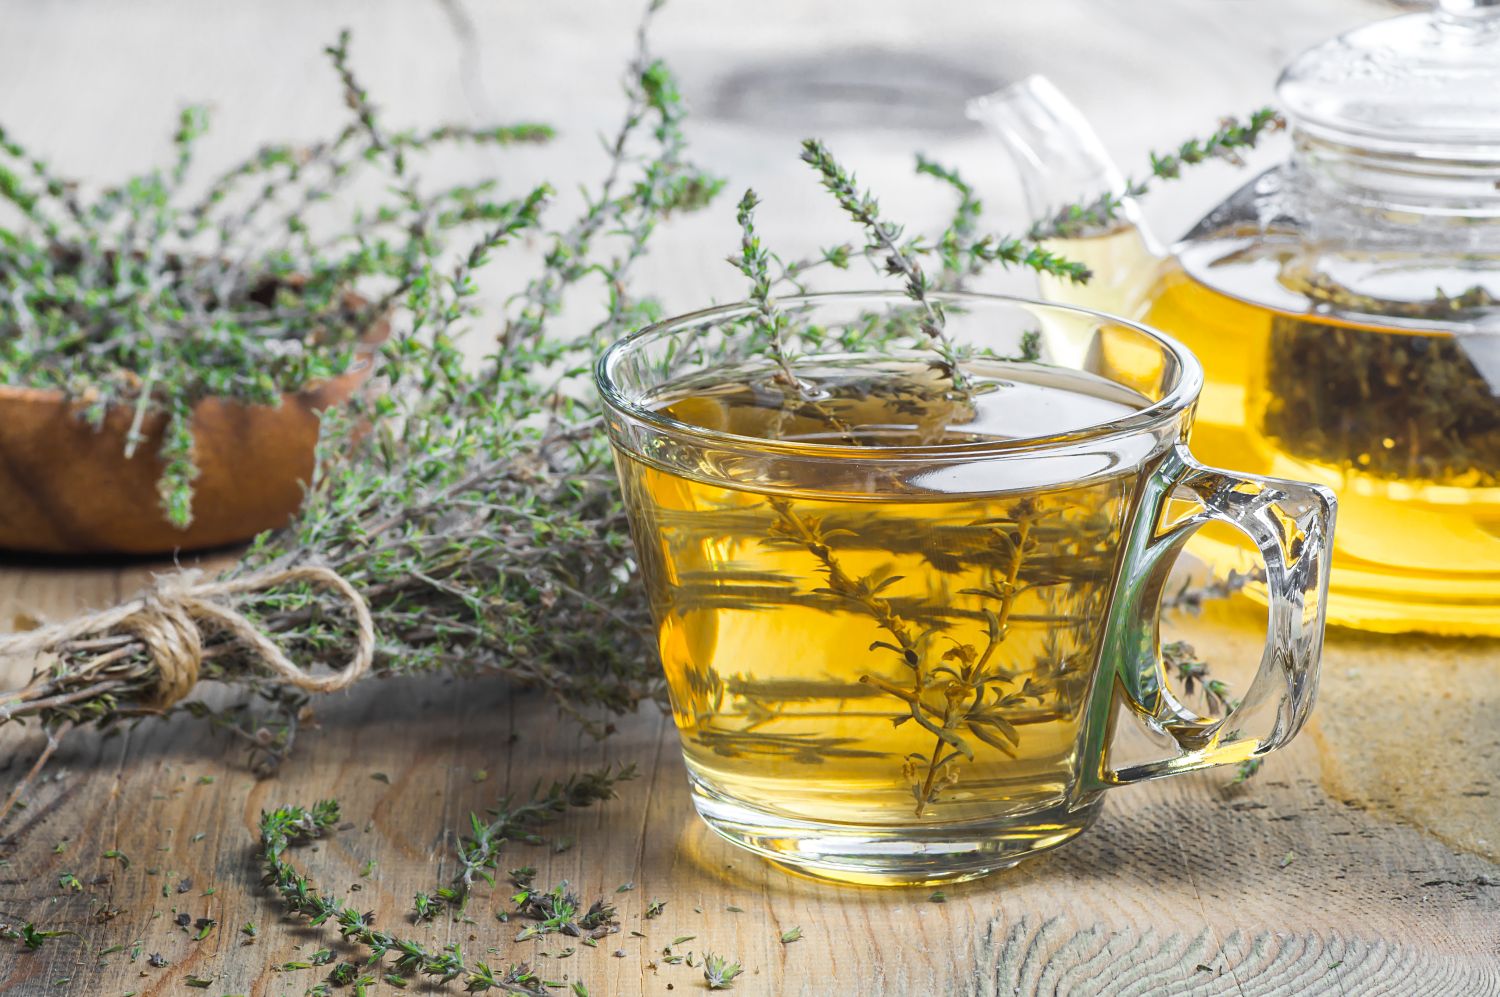 How To Use Thyme For Mucus